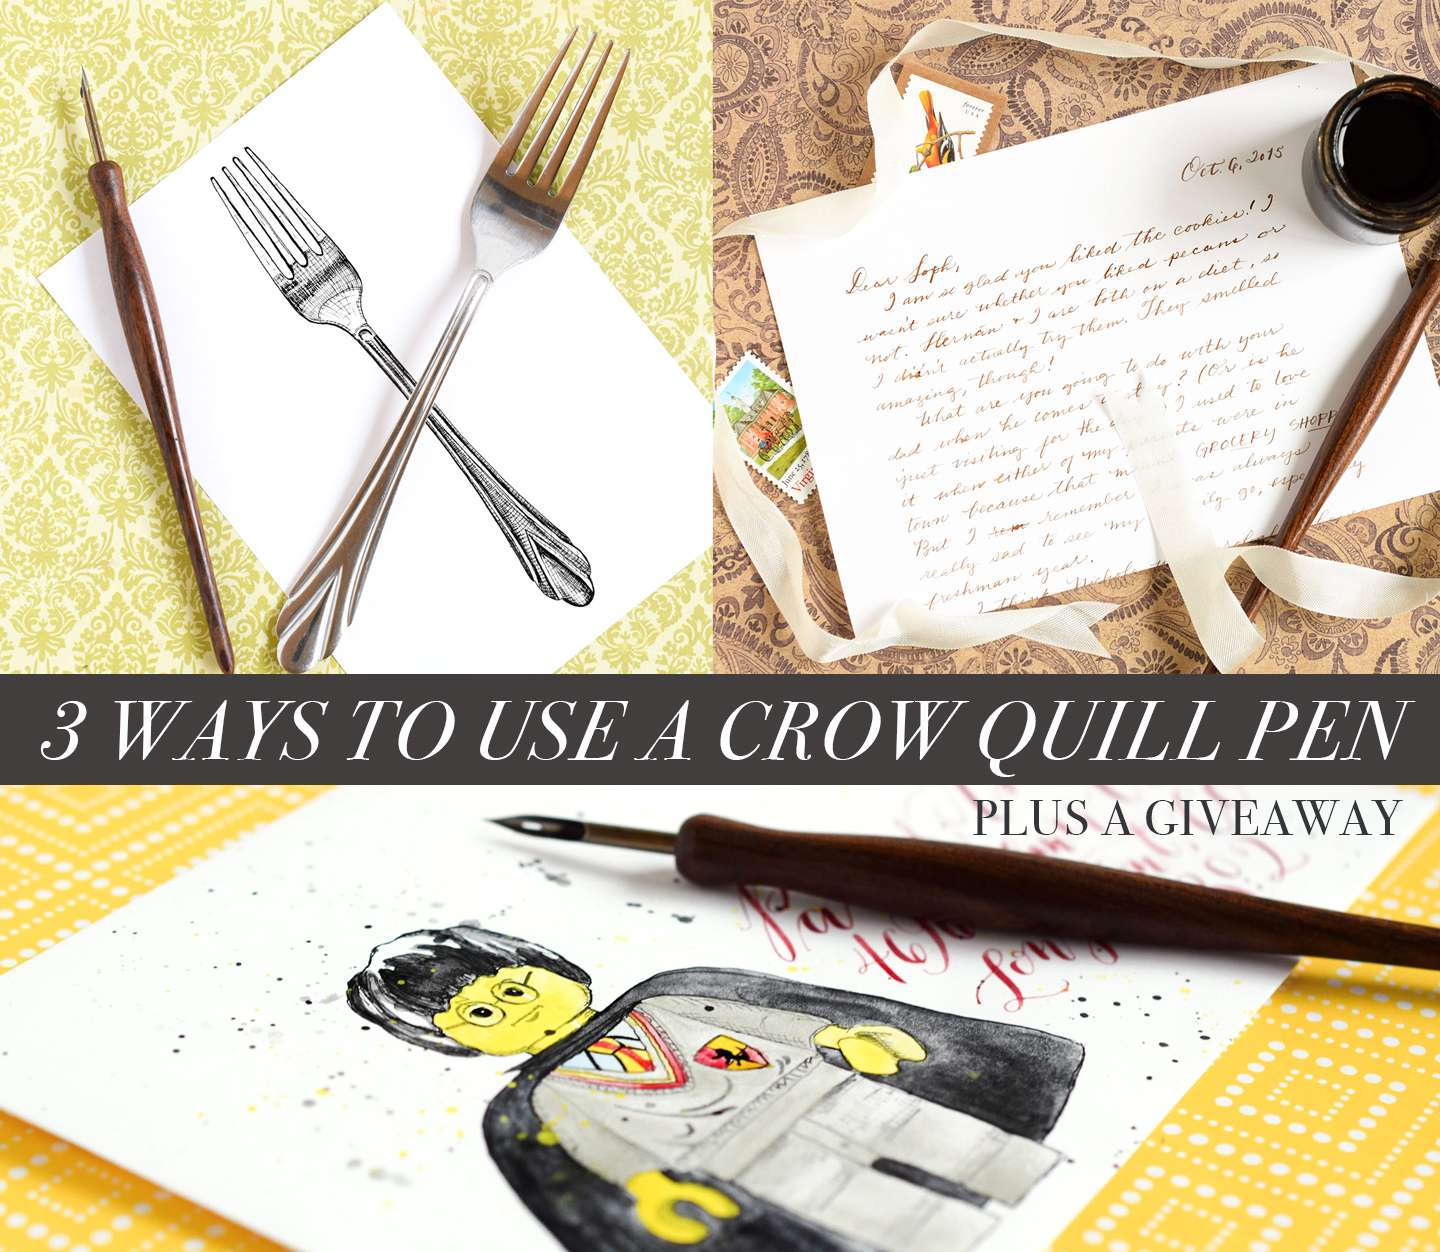 3 Ways to Use a Crow Quill Pen – The Postman's Knock